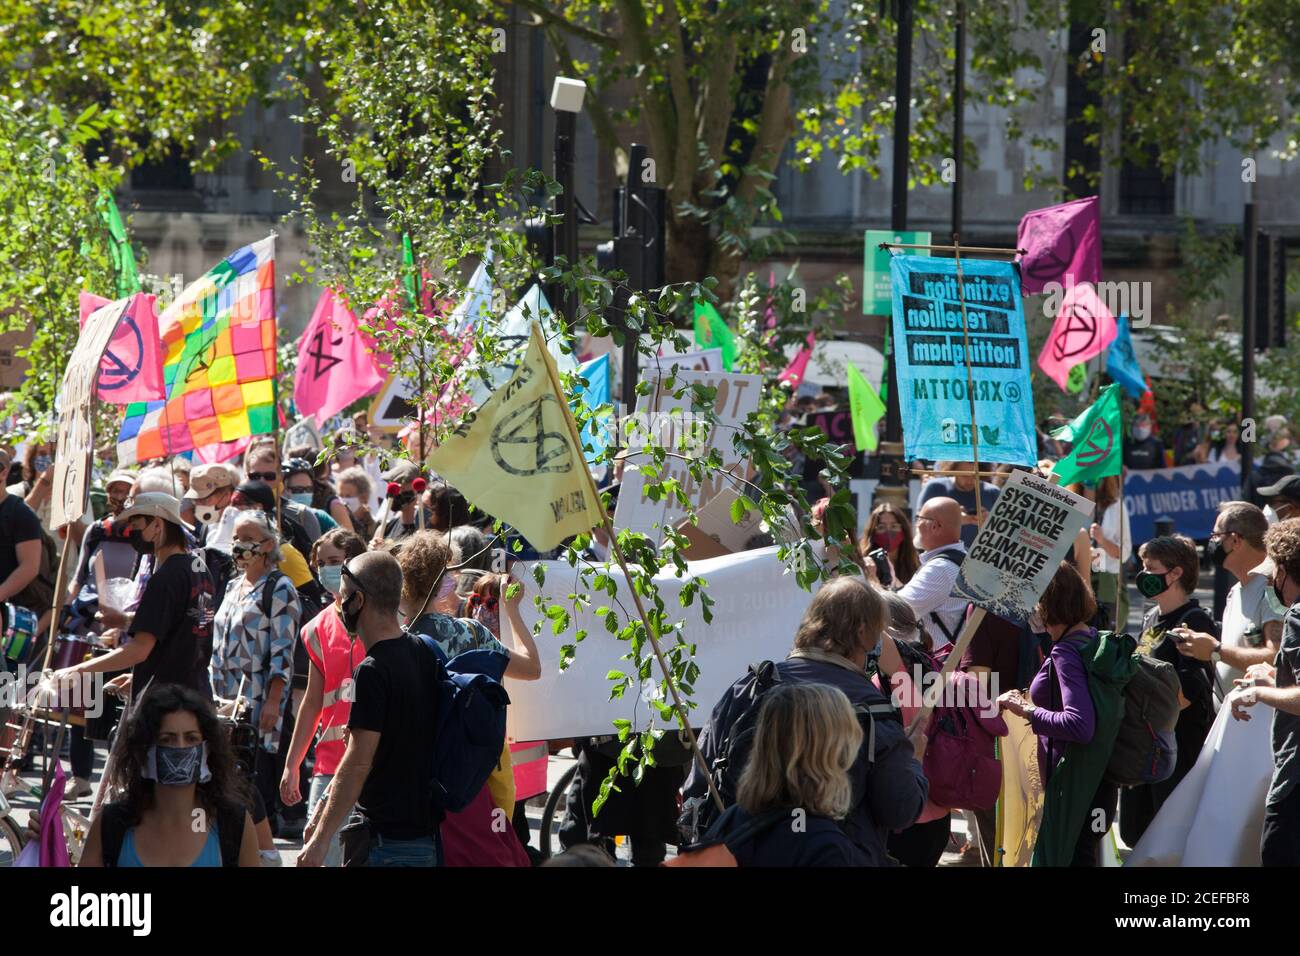 London, UK, 1 Sept. 2020: Extinction Rebellion protestors marched on Parliament Square and breached police lines to close surrounding roads. A few arrests were made. The environmental campaigners are calling for MPs to support the Climate and Ecological Emergencies Bill (CEE Bill). Anna Watson/Alamy Live News Stock Photo